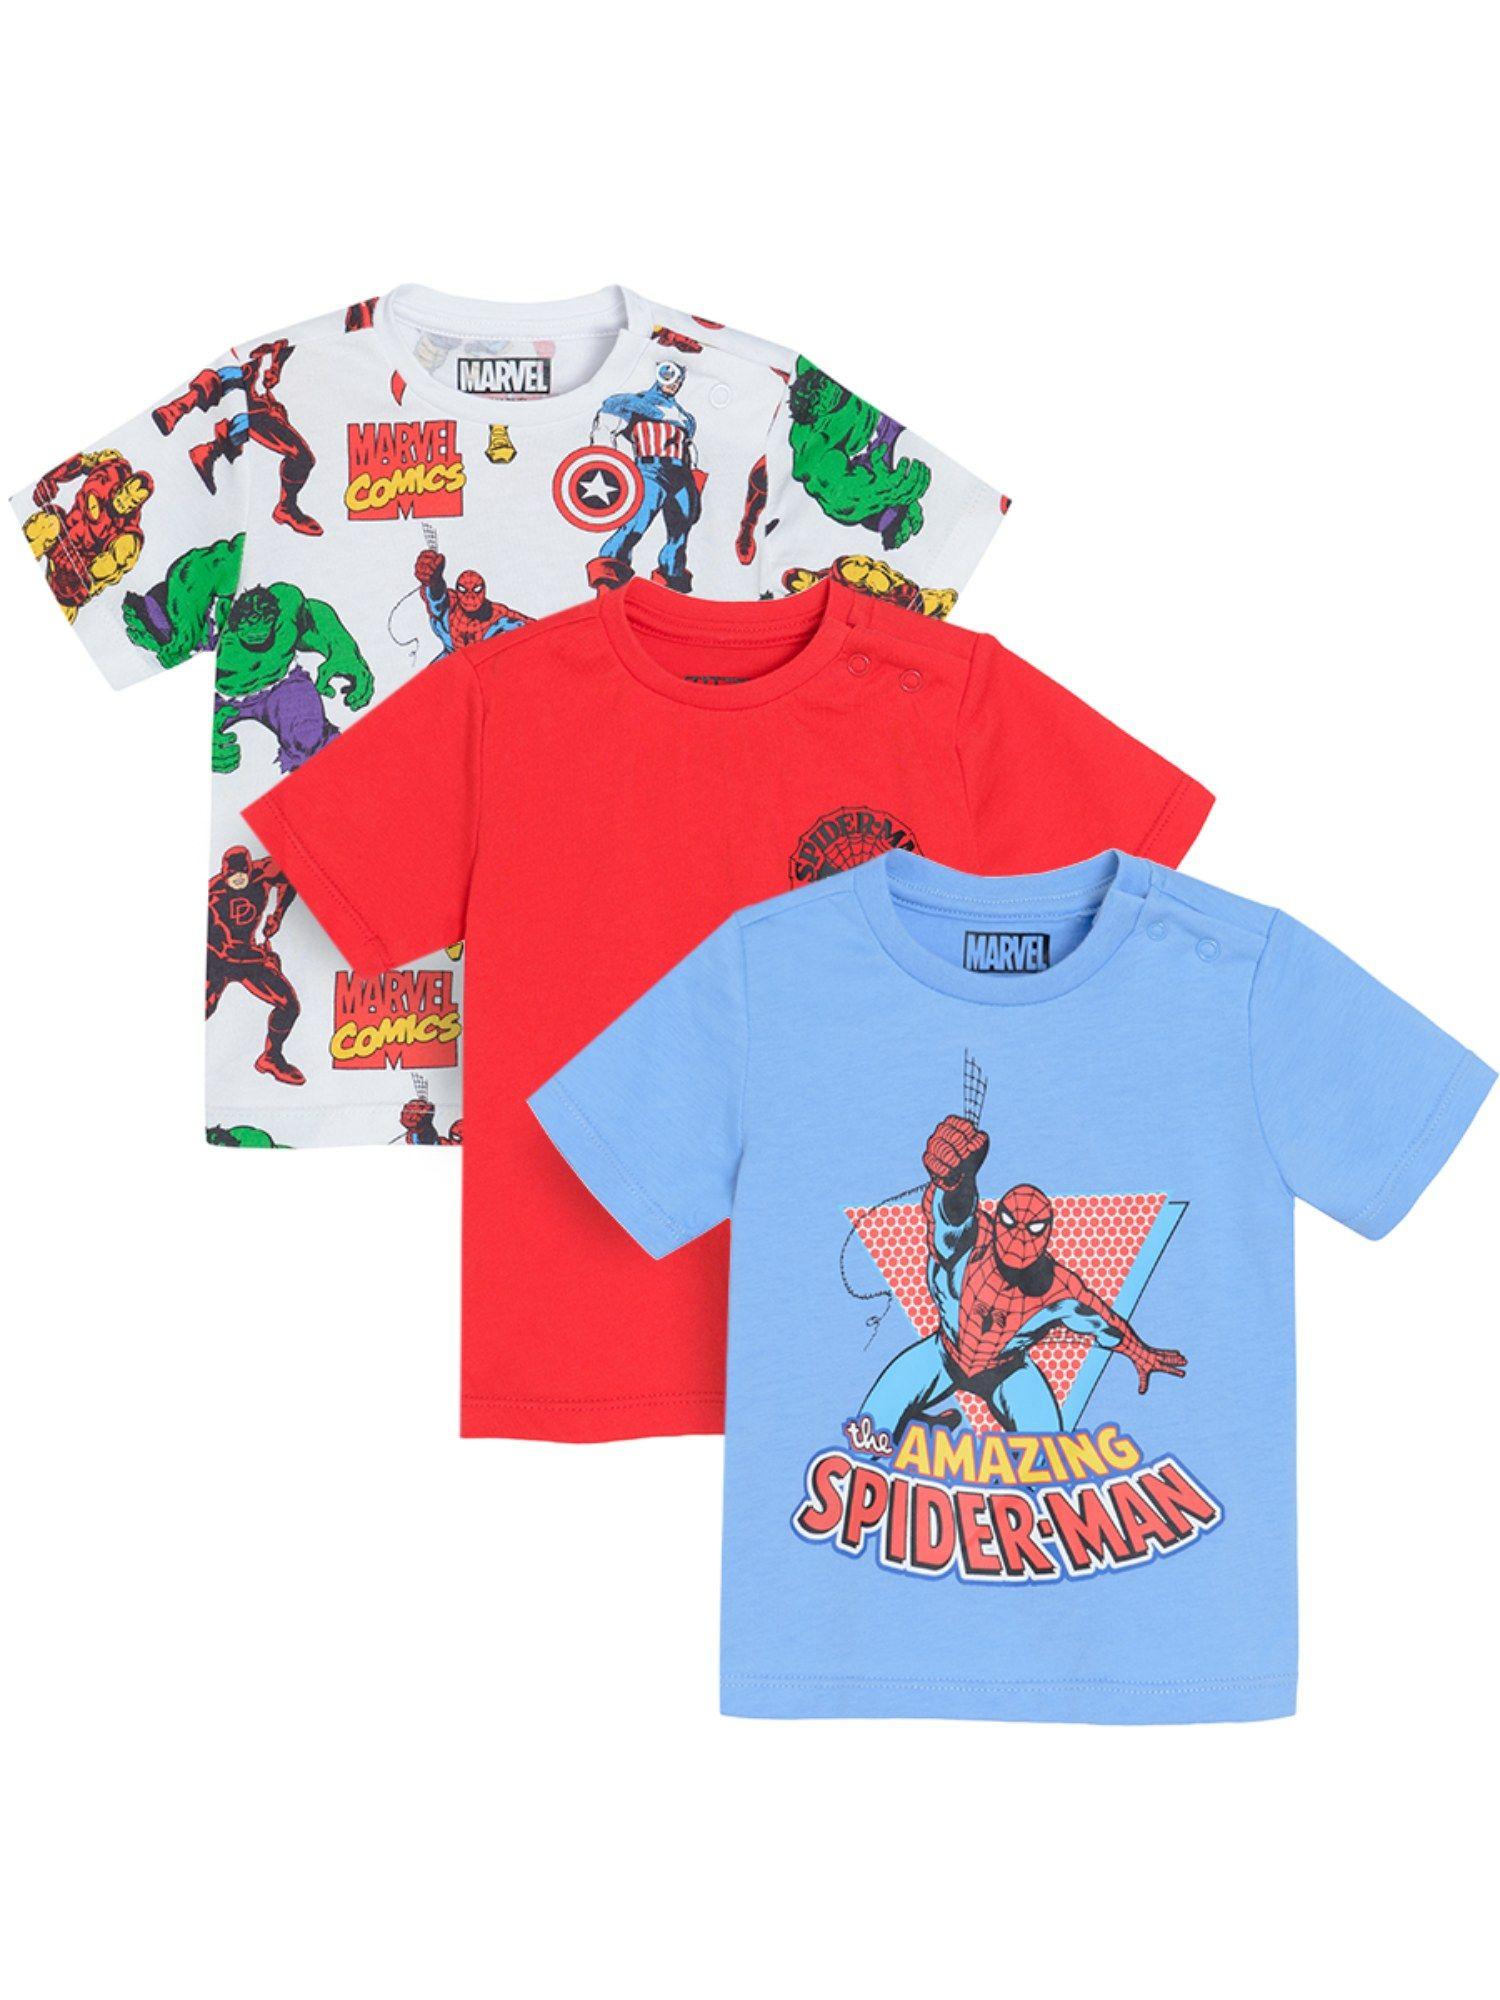 smyk spider-man boys multi-color printed t-shirts (pack of 3)